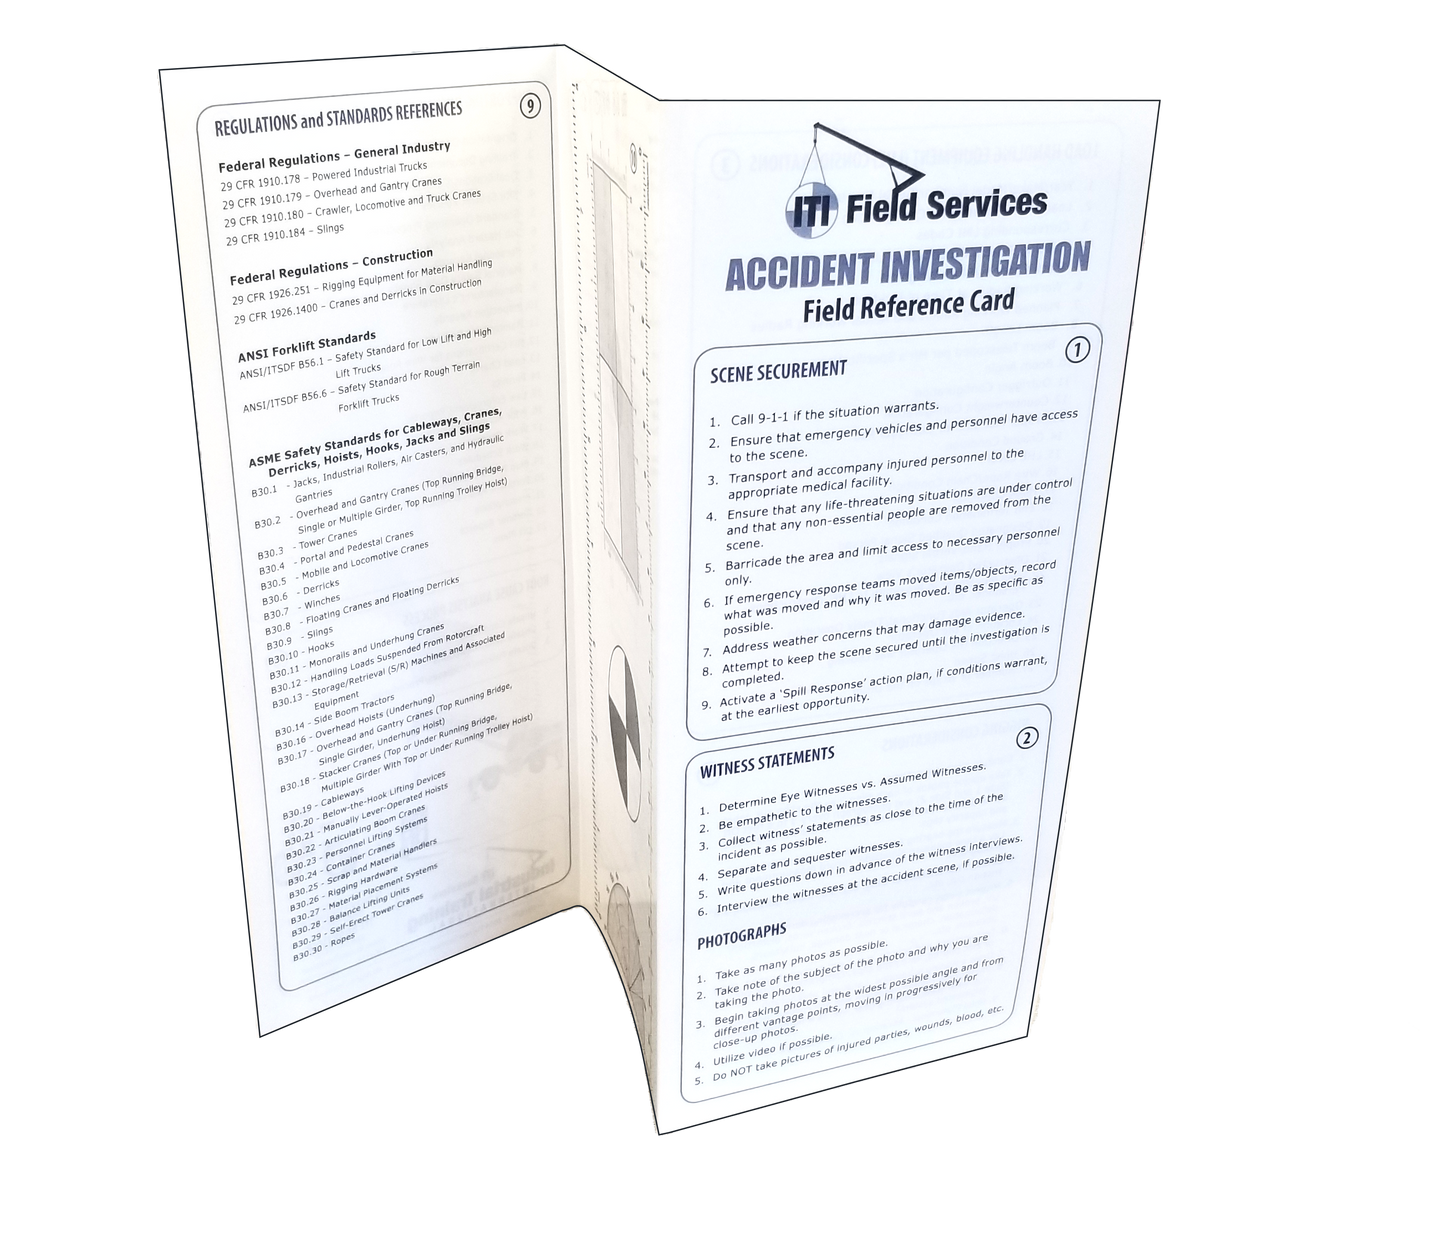 Accident Investigation Field Reference Card